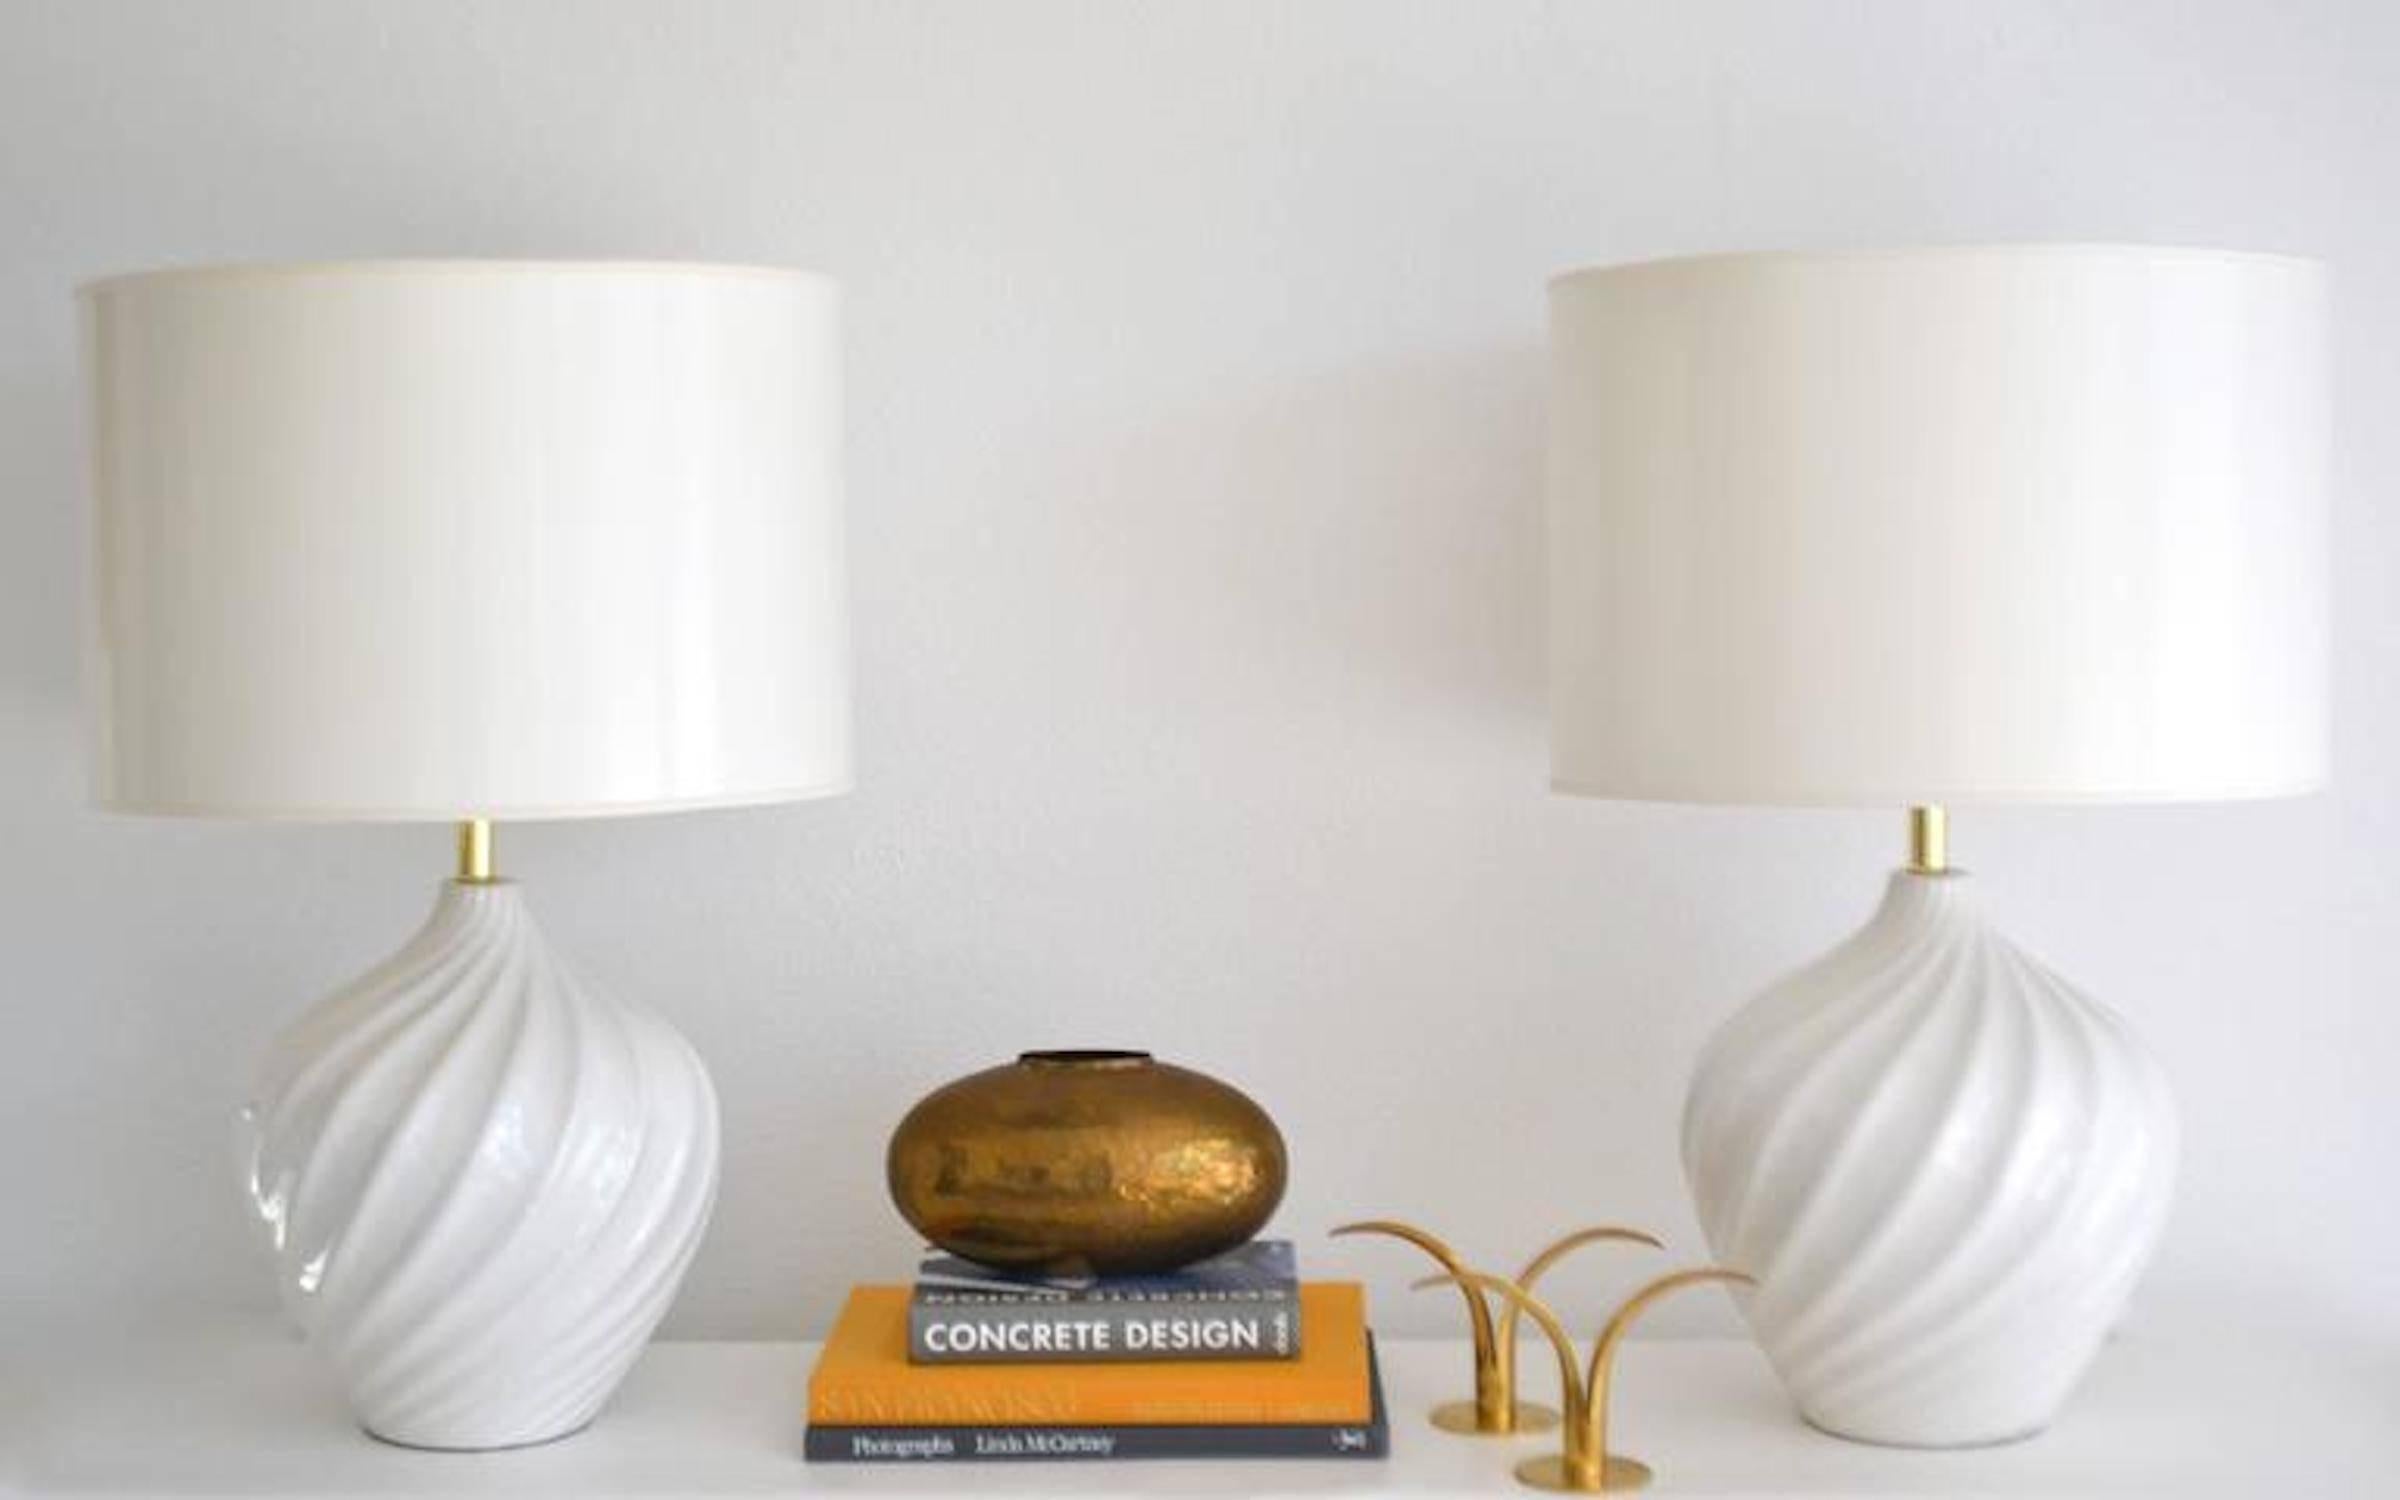 Stunning pair of midcentury Blanc de Chine Jar form table lamps, circa 1960s. These striking lamps are artisan crafted to resemble rippled crest patterns and are wired with brass fittings.
Shades not included.
Measurements: 
Overall: 28.5